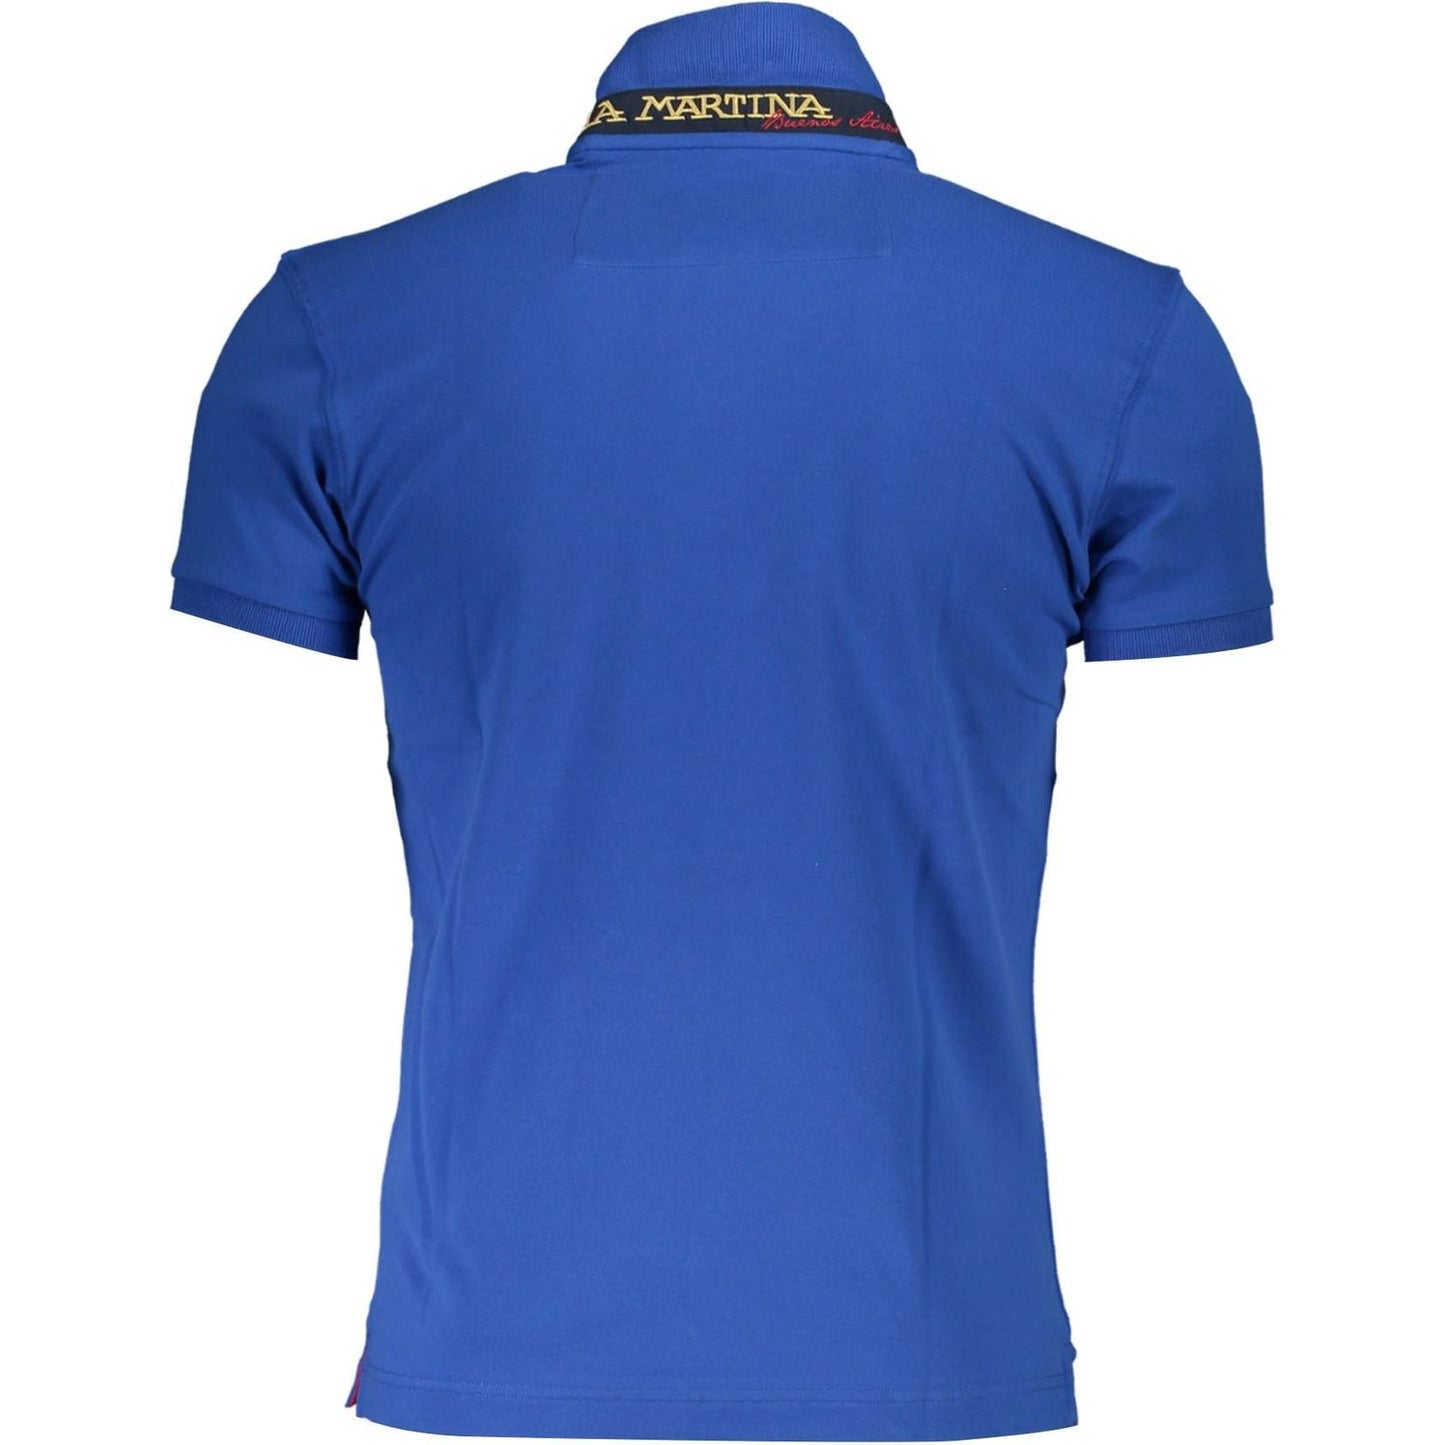 La Martina Slim Fit Embroidered Polo with Contrast Details slim-fit-embroidered-polo-with-contrast-details